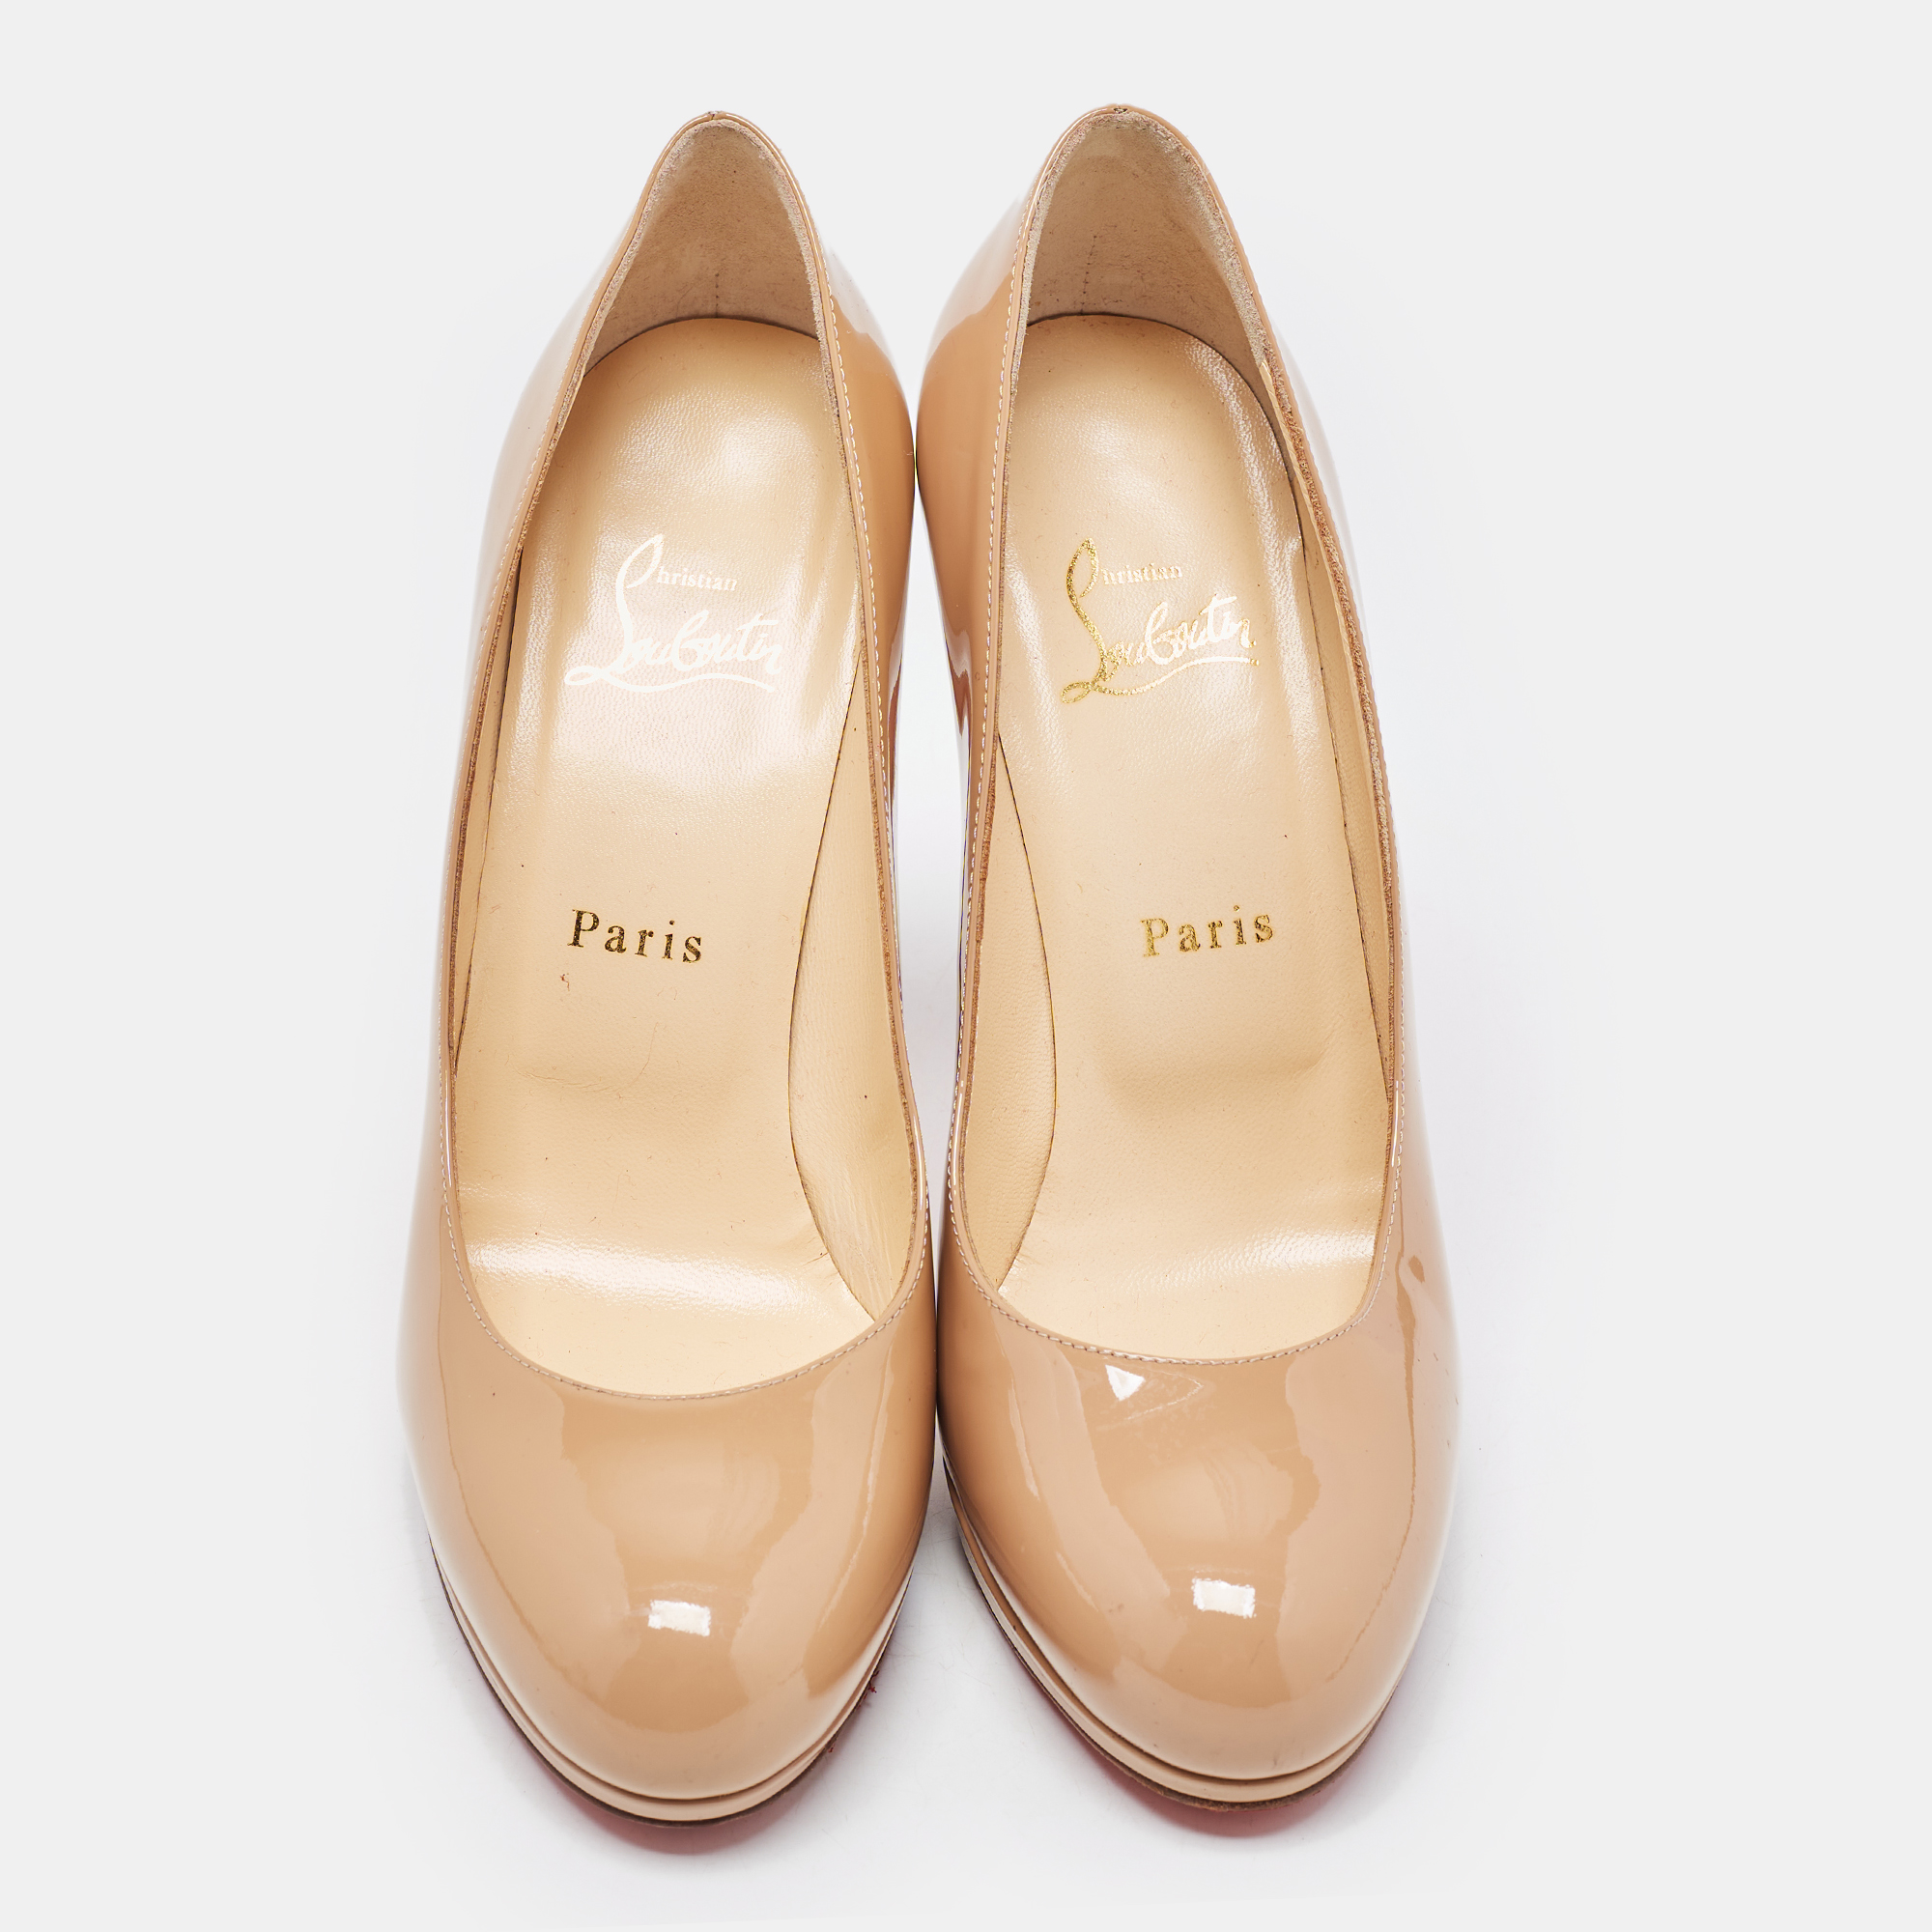 Christian Louboutin Beige Patent Leather Simple Round Toe Pumps Size 38.5